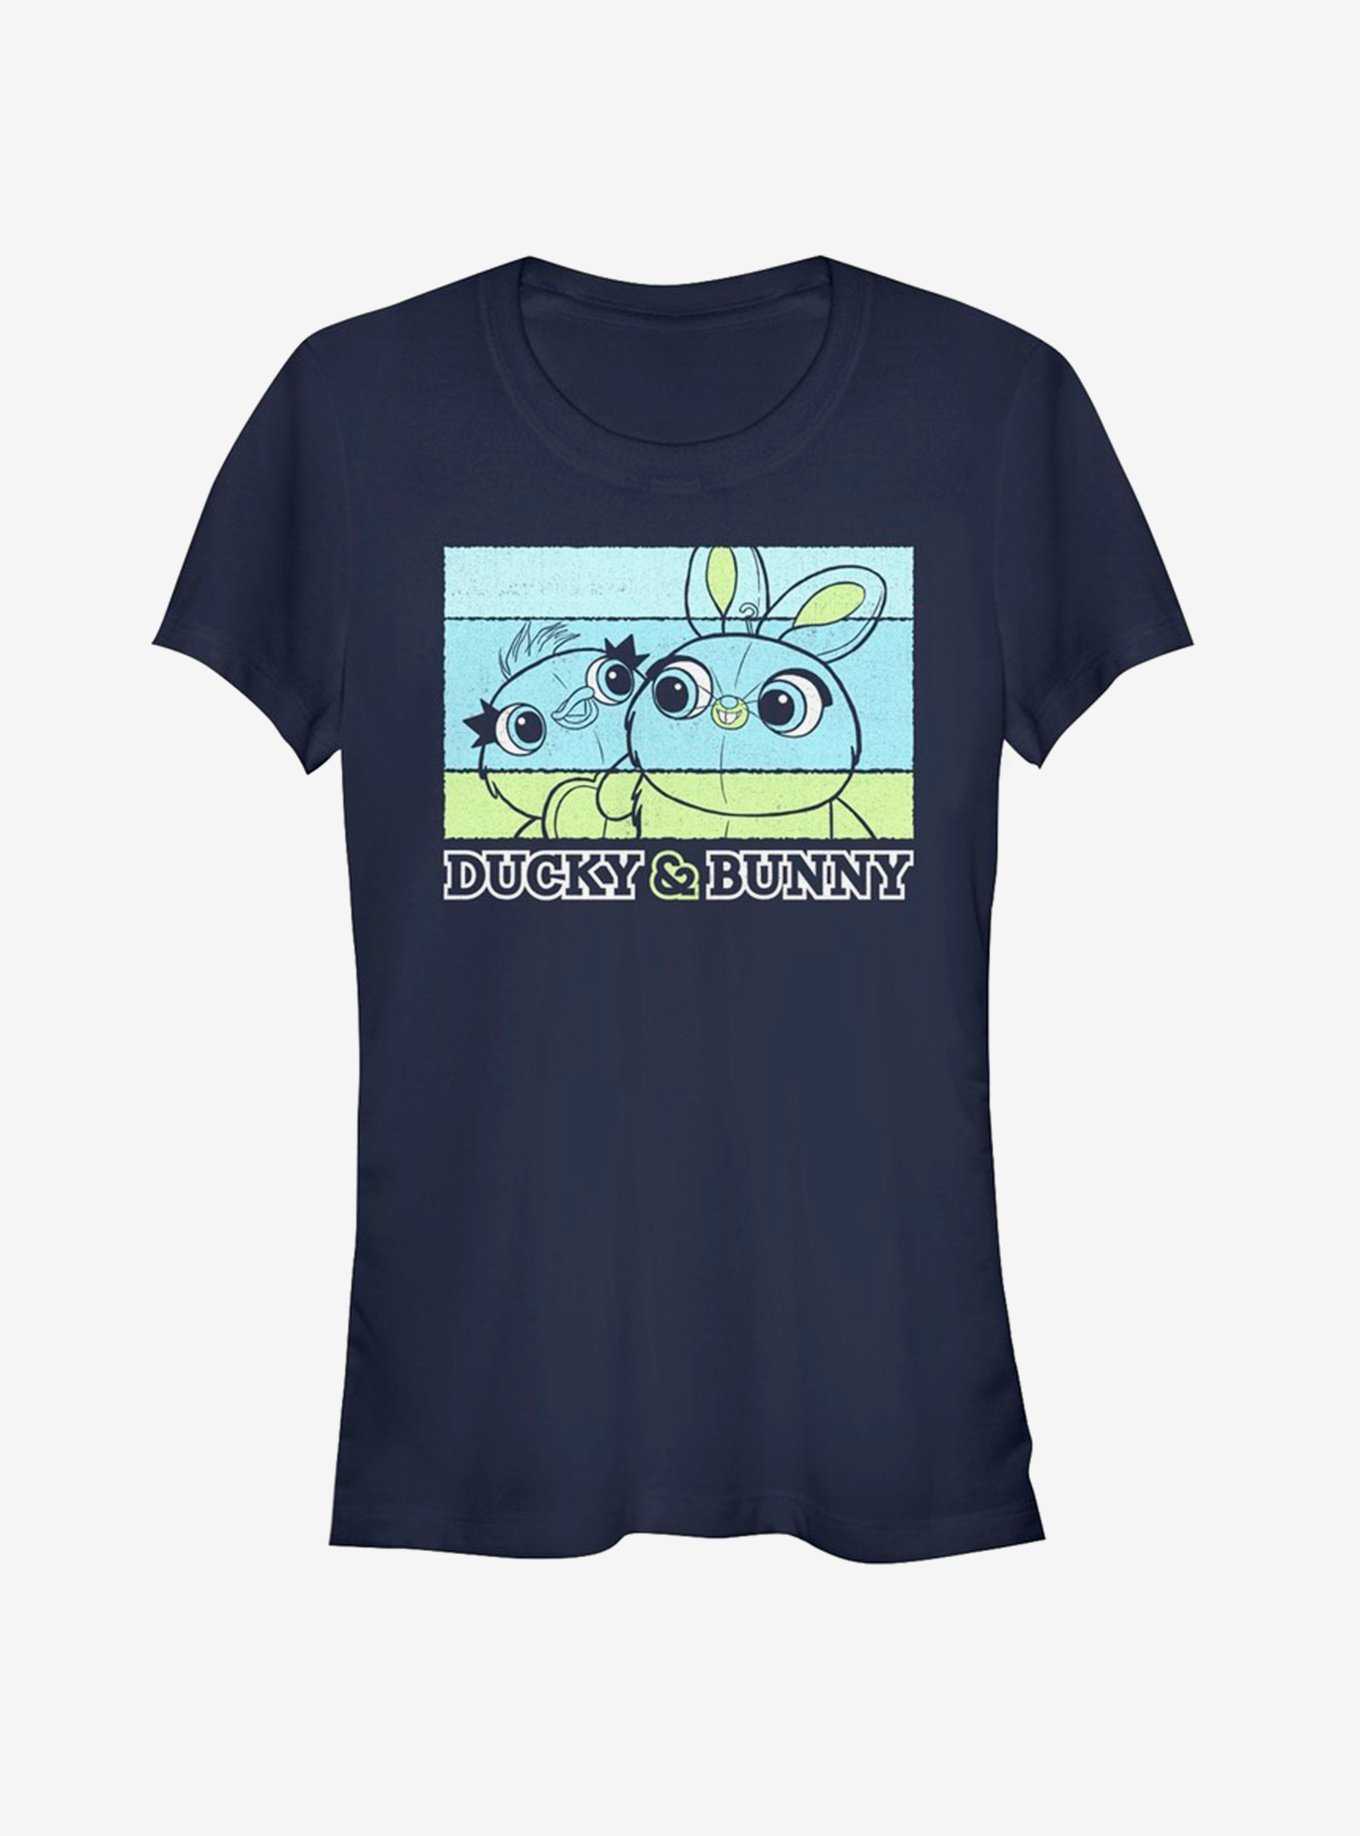 Disney Pixar Toy Story 4 Duckie And Bunny Girls T-Shirt, , hi-res